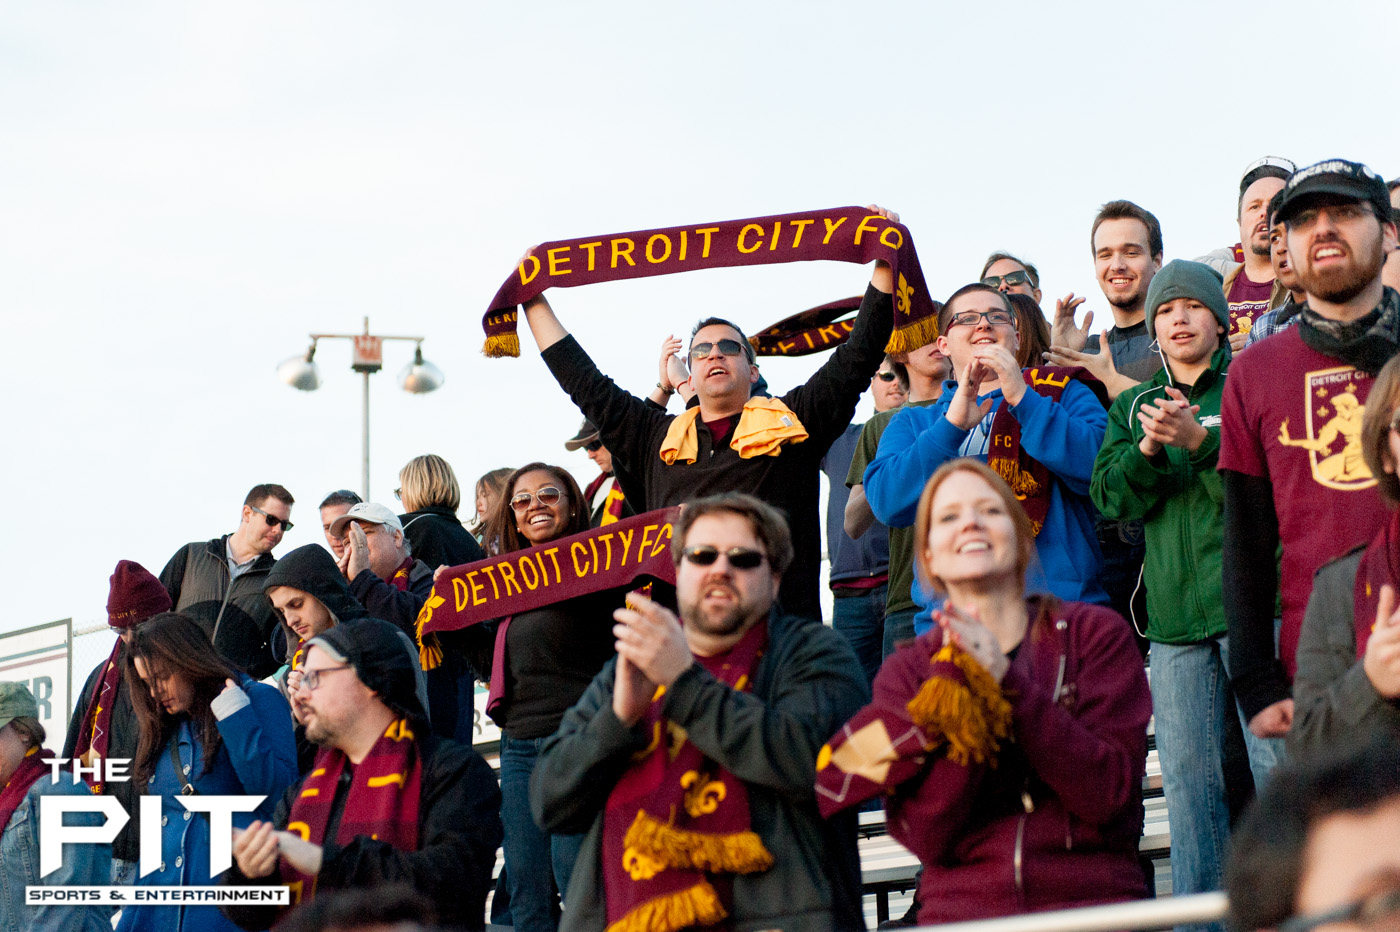 A packed Detroit City FC crowd show off their "Detroit City FC" scarfs to the opposing teams stands at a scrimmage match against Saginaw Valley on April 19, 2014 at Hurley Field. Brian Quintos / The Pit: SE